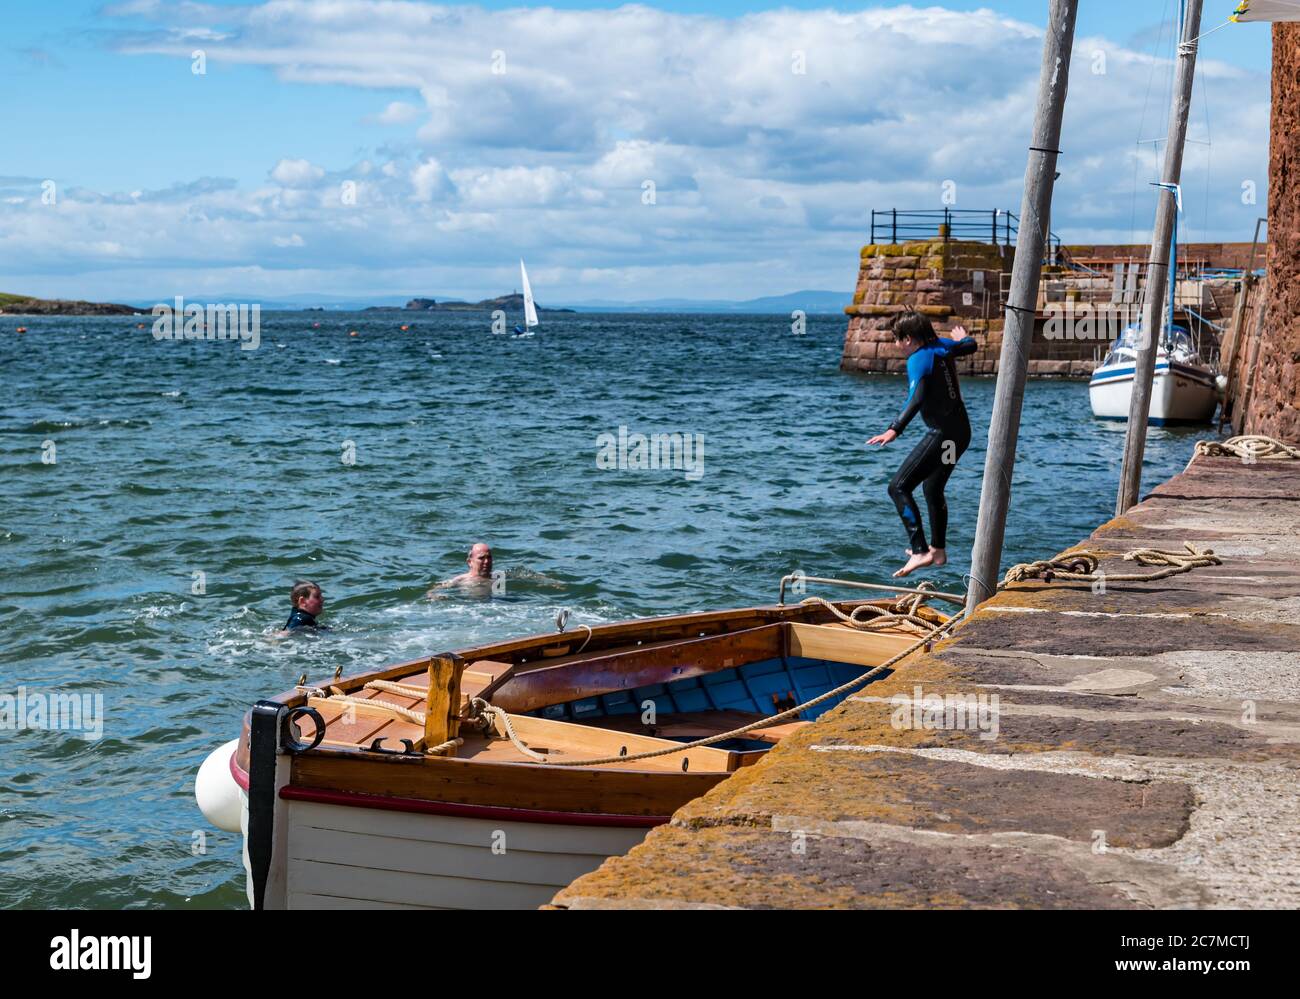 North Berwick, East Lothian, Scotland, United Kingdom, 18th July 2020. UK Weather: Summer sunshine in the seaside town. A boy jumps off the harbour wall into the Firth of Forth in West Bay Stock Photo